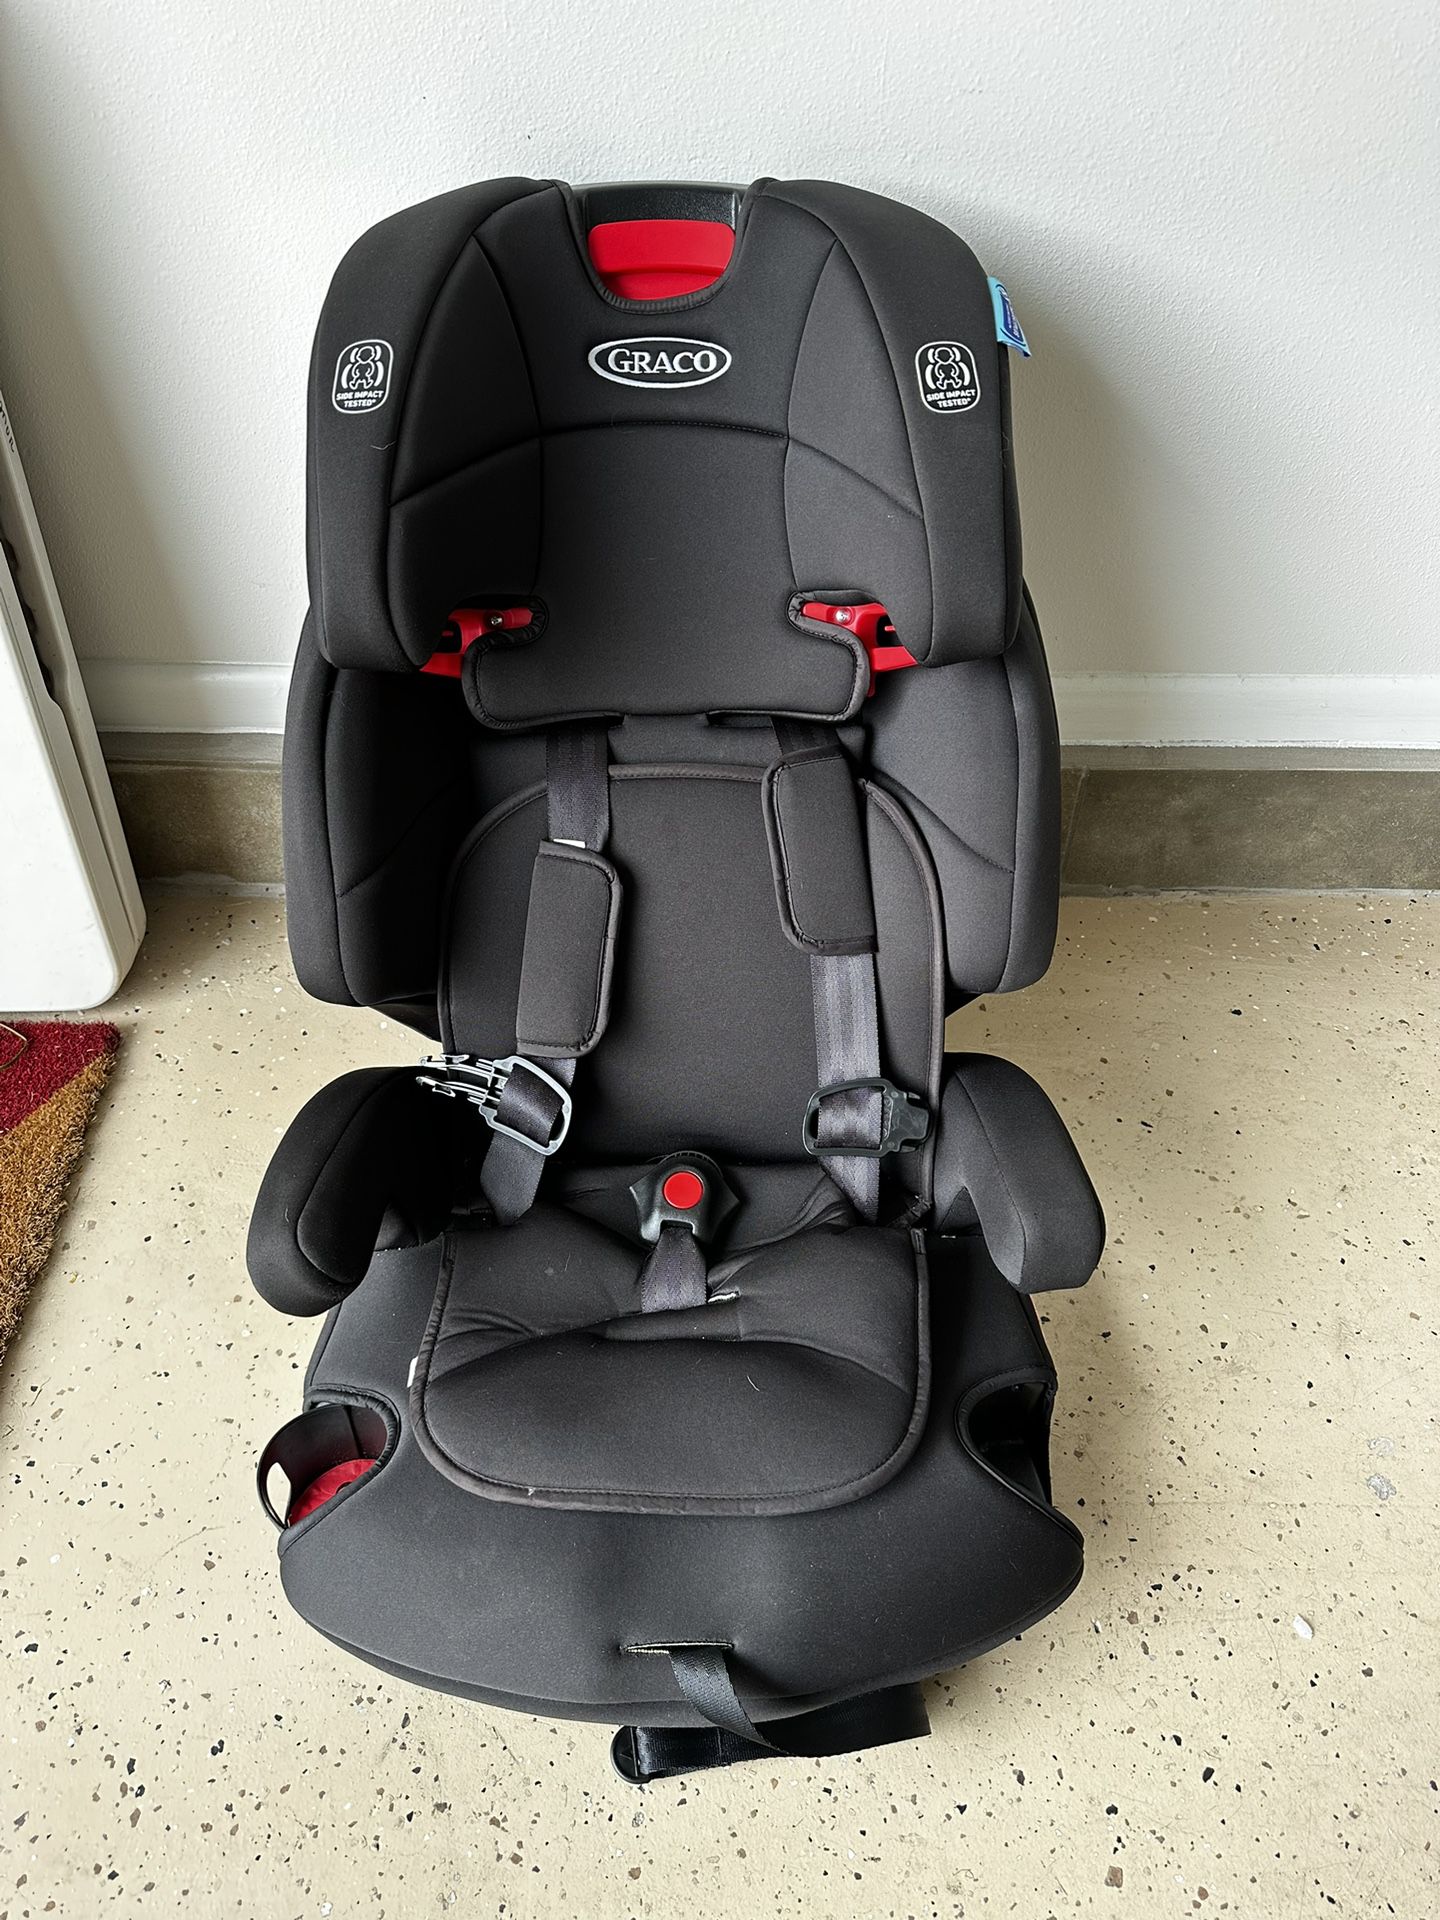 Graco Car/Booster seat